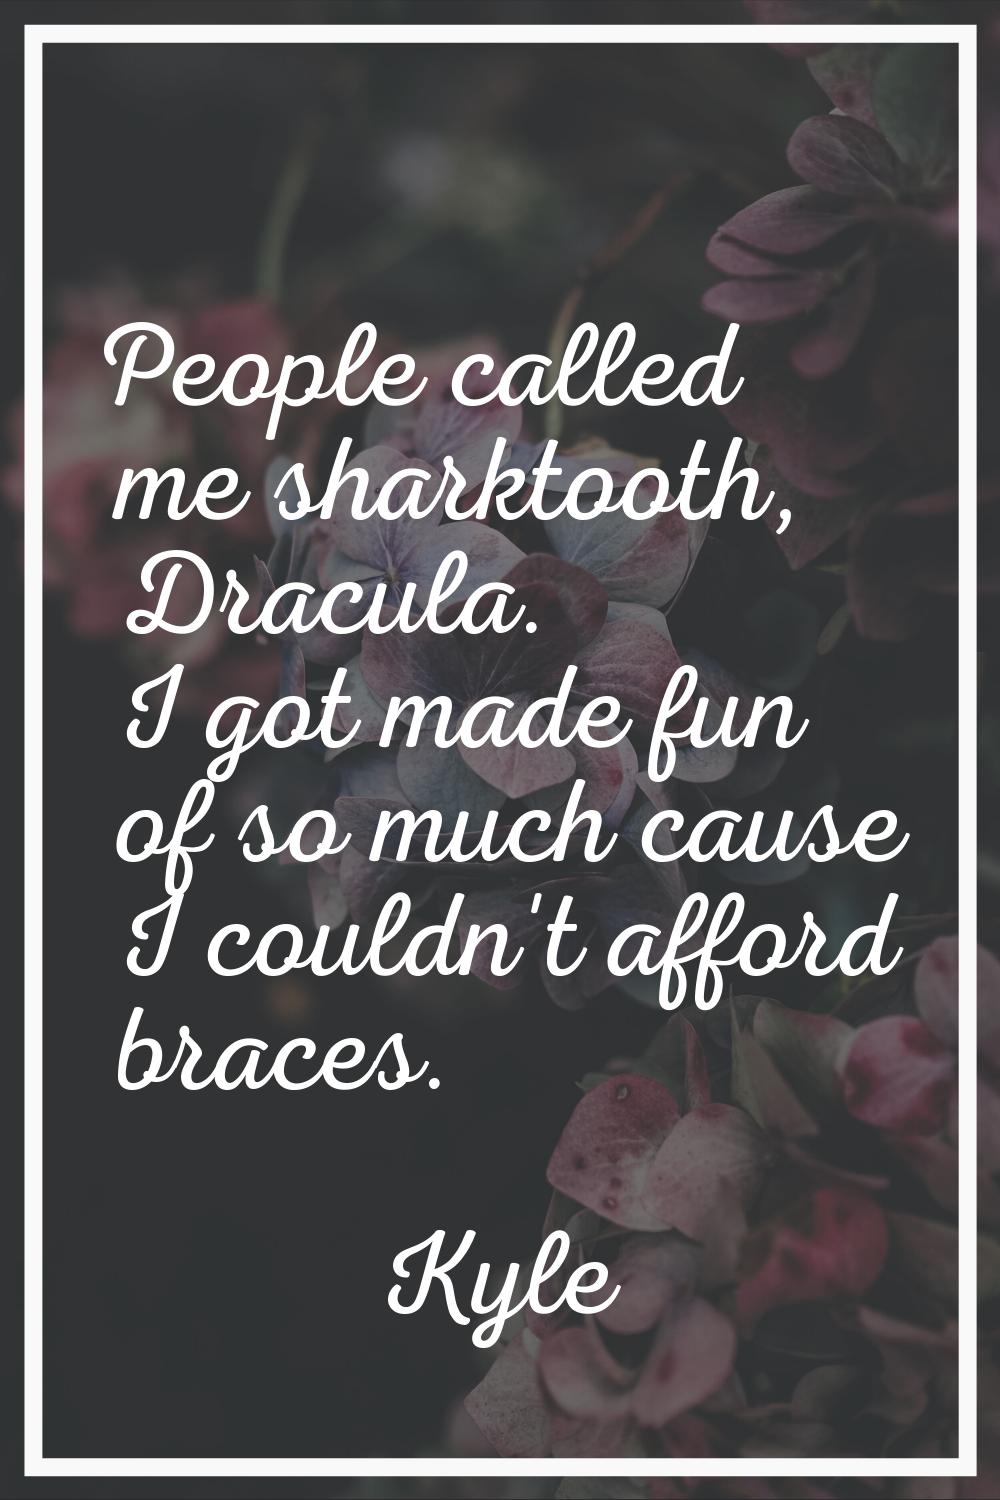 People called me sharktooth, Dracula. I got made fun of so much cause I couldn't afford braces.